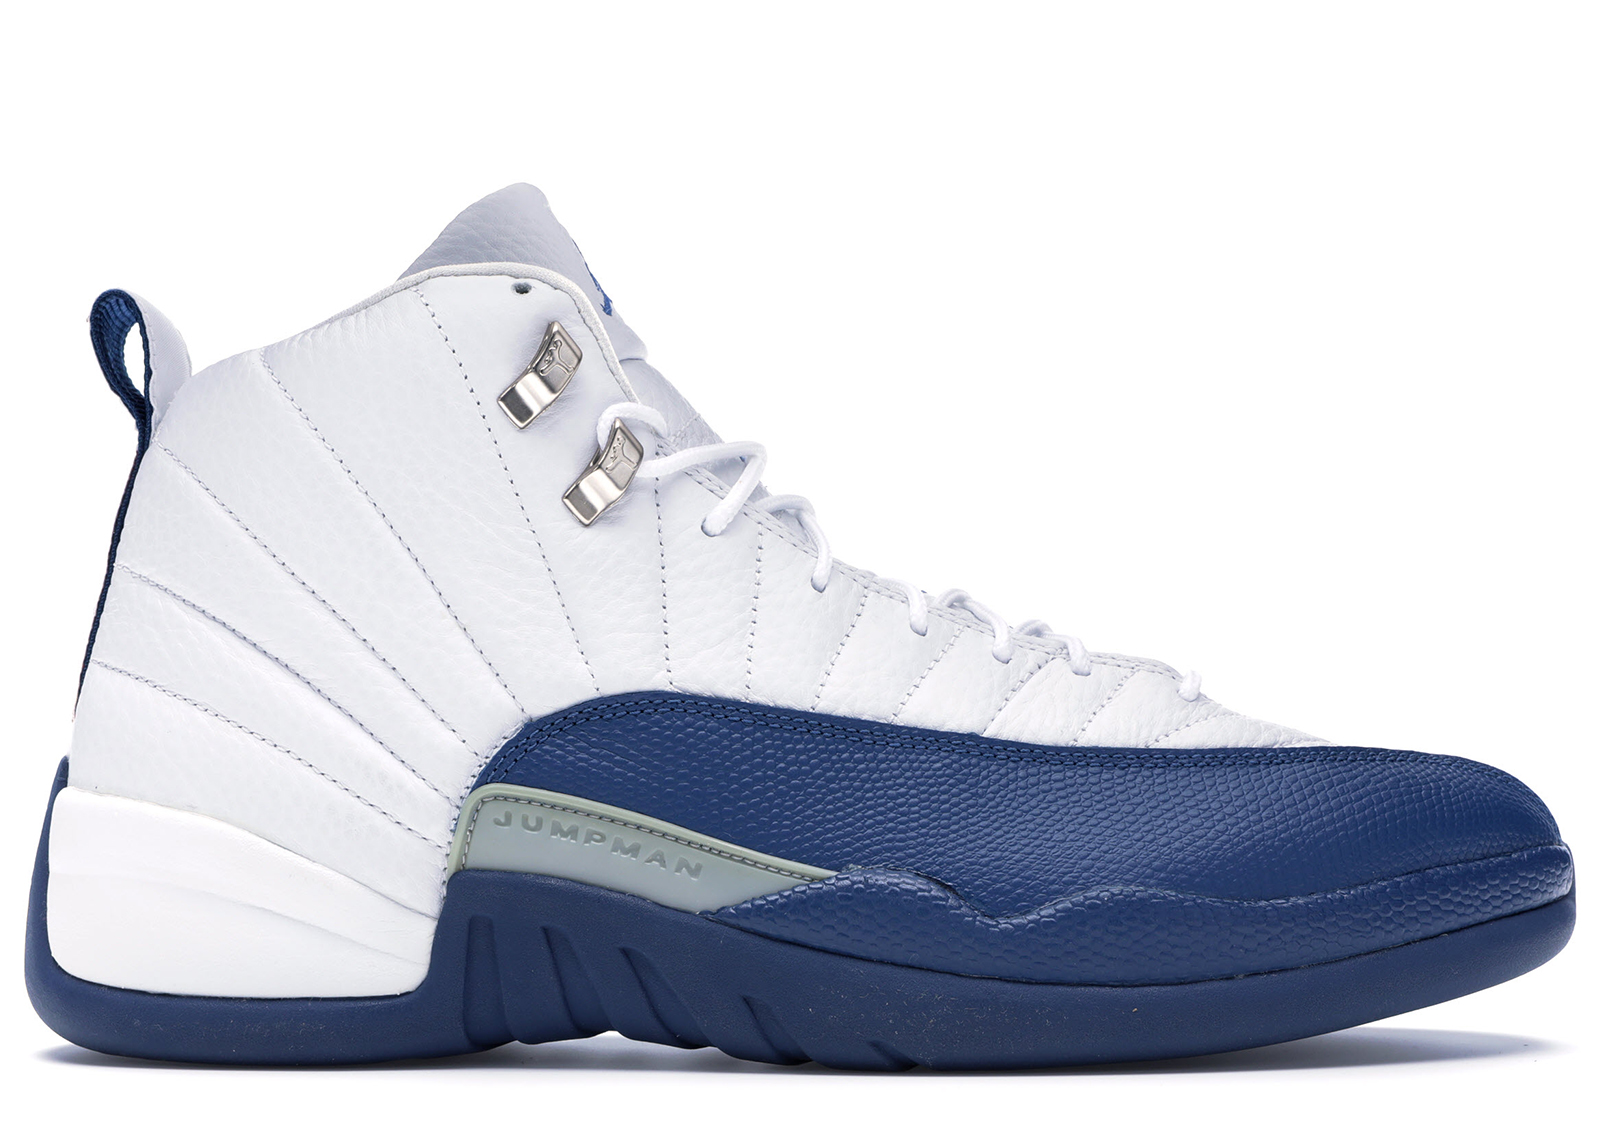 french blue 12s stockx